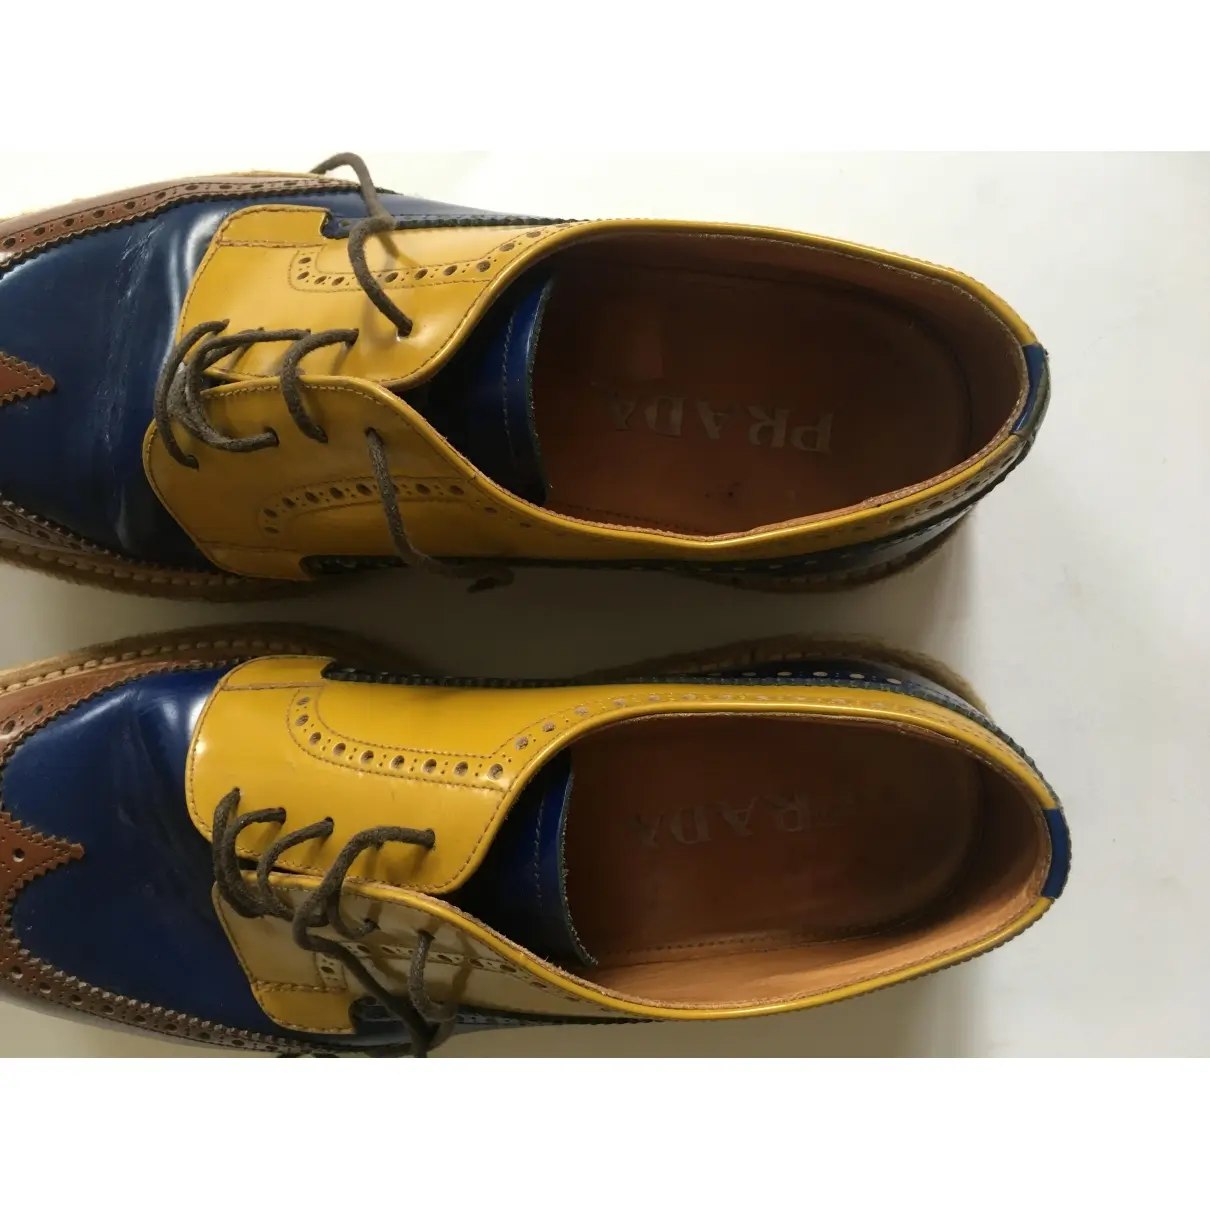 Buy Prada Patent leather lace ups online